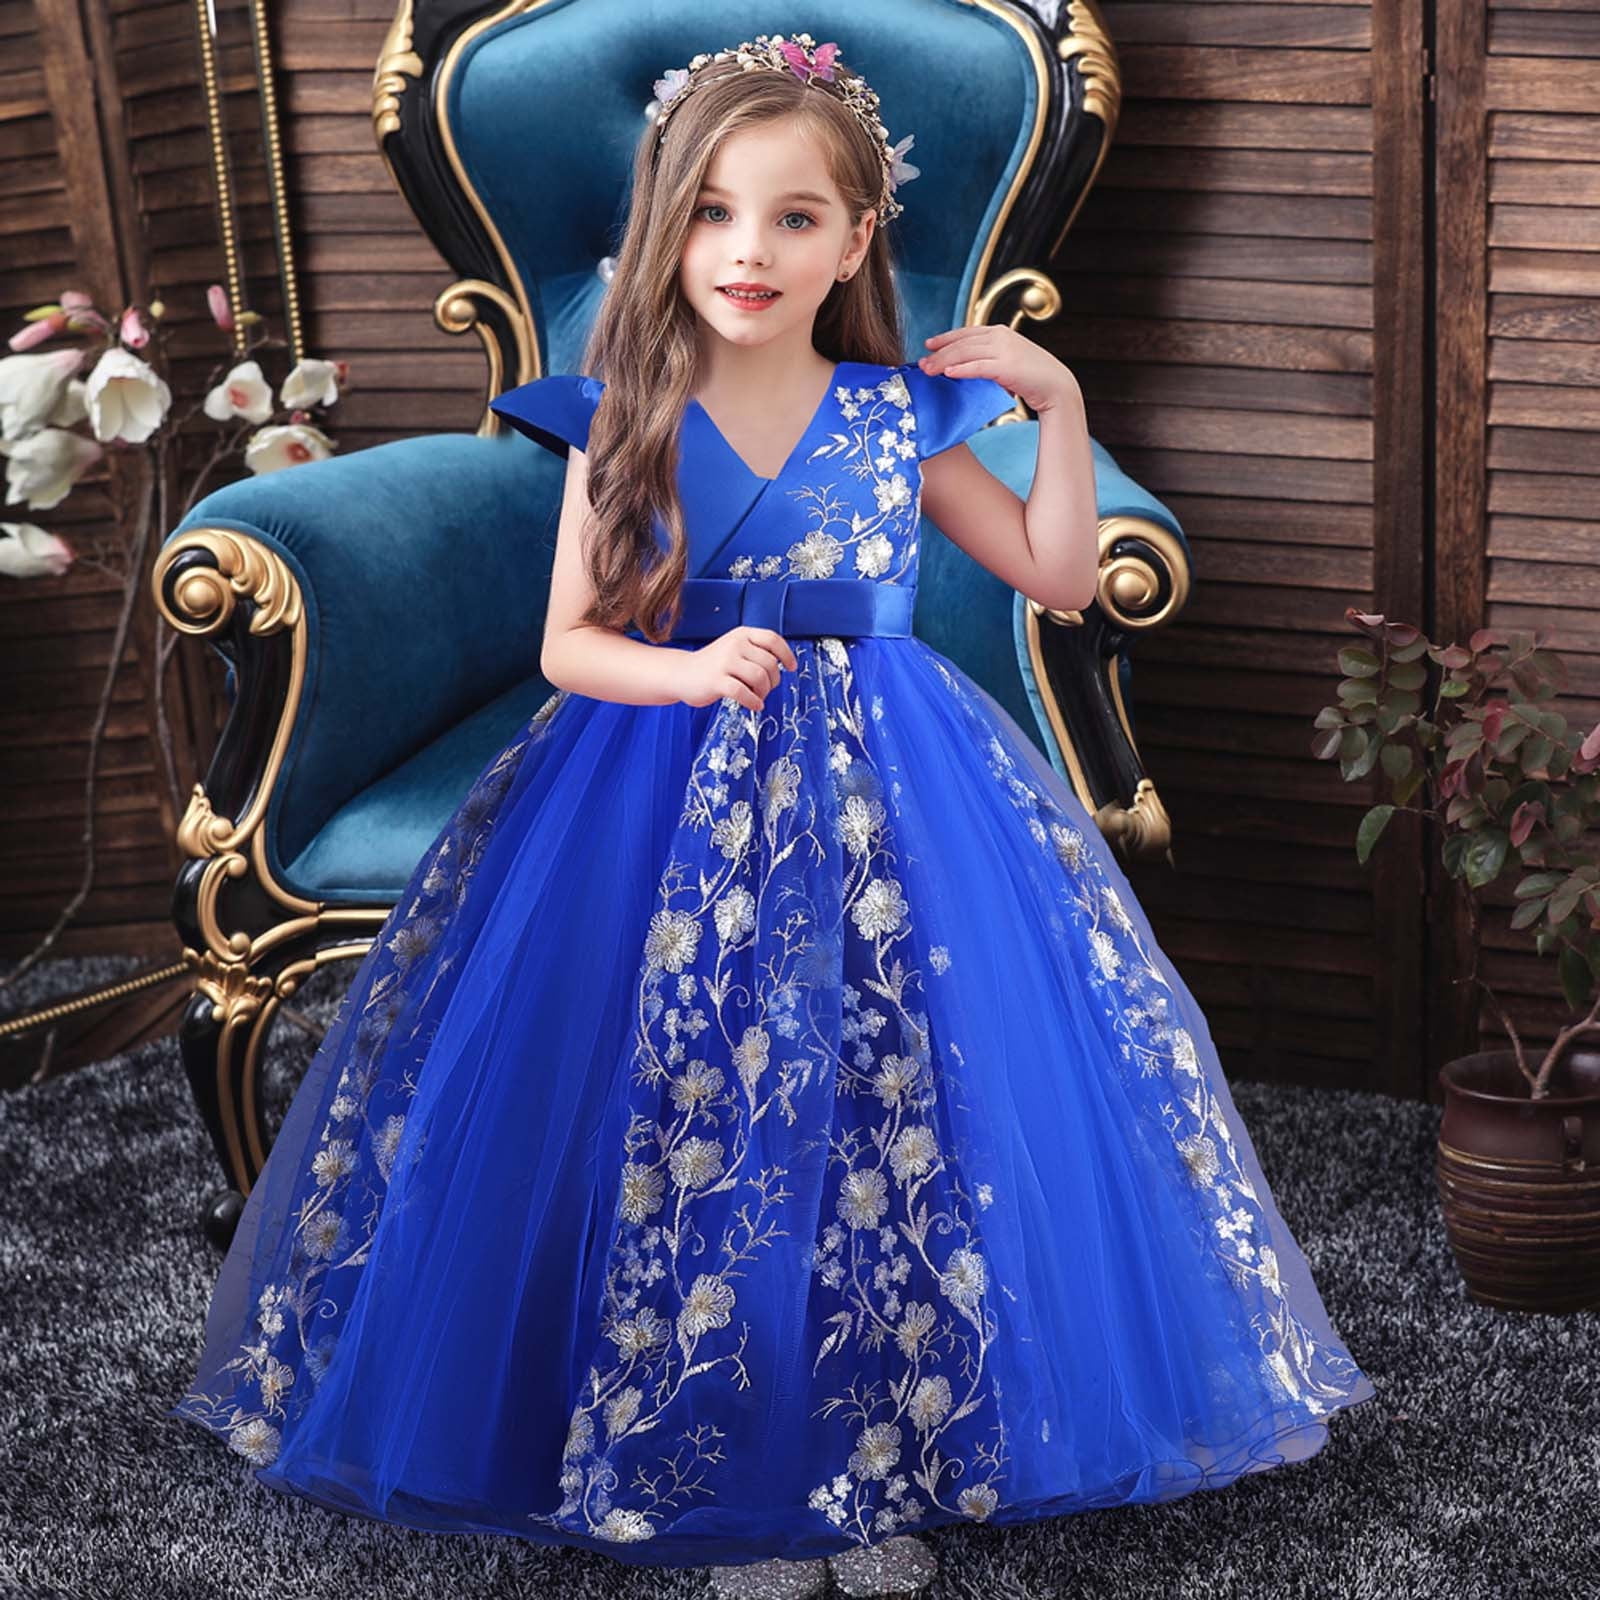 Emerald Green Satin Flower Girls Dresses Crew Neck Cap Sleeves Short Kids  Celebrity Dresses High Low Girls Pageant Gowns From Songjia668, $39.95 |  DHgate.Com